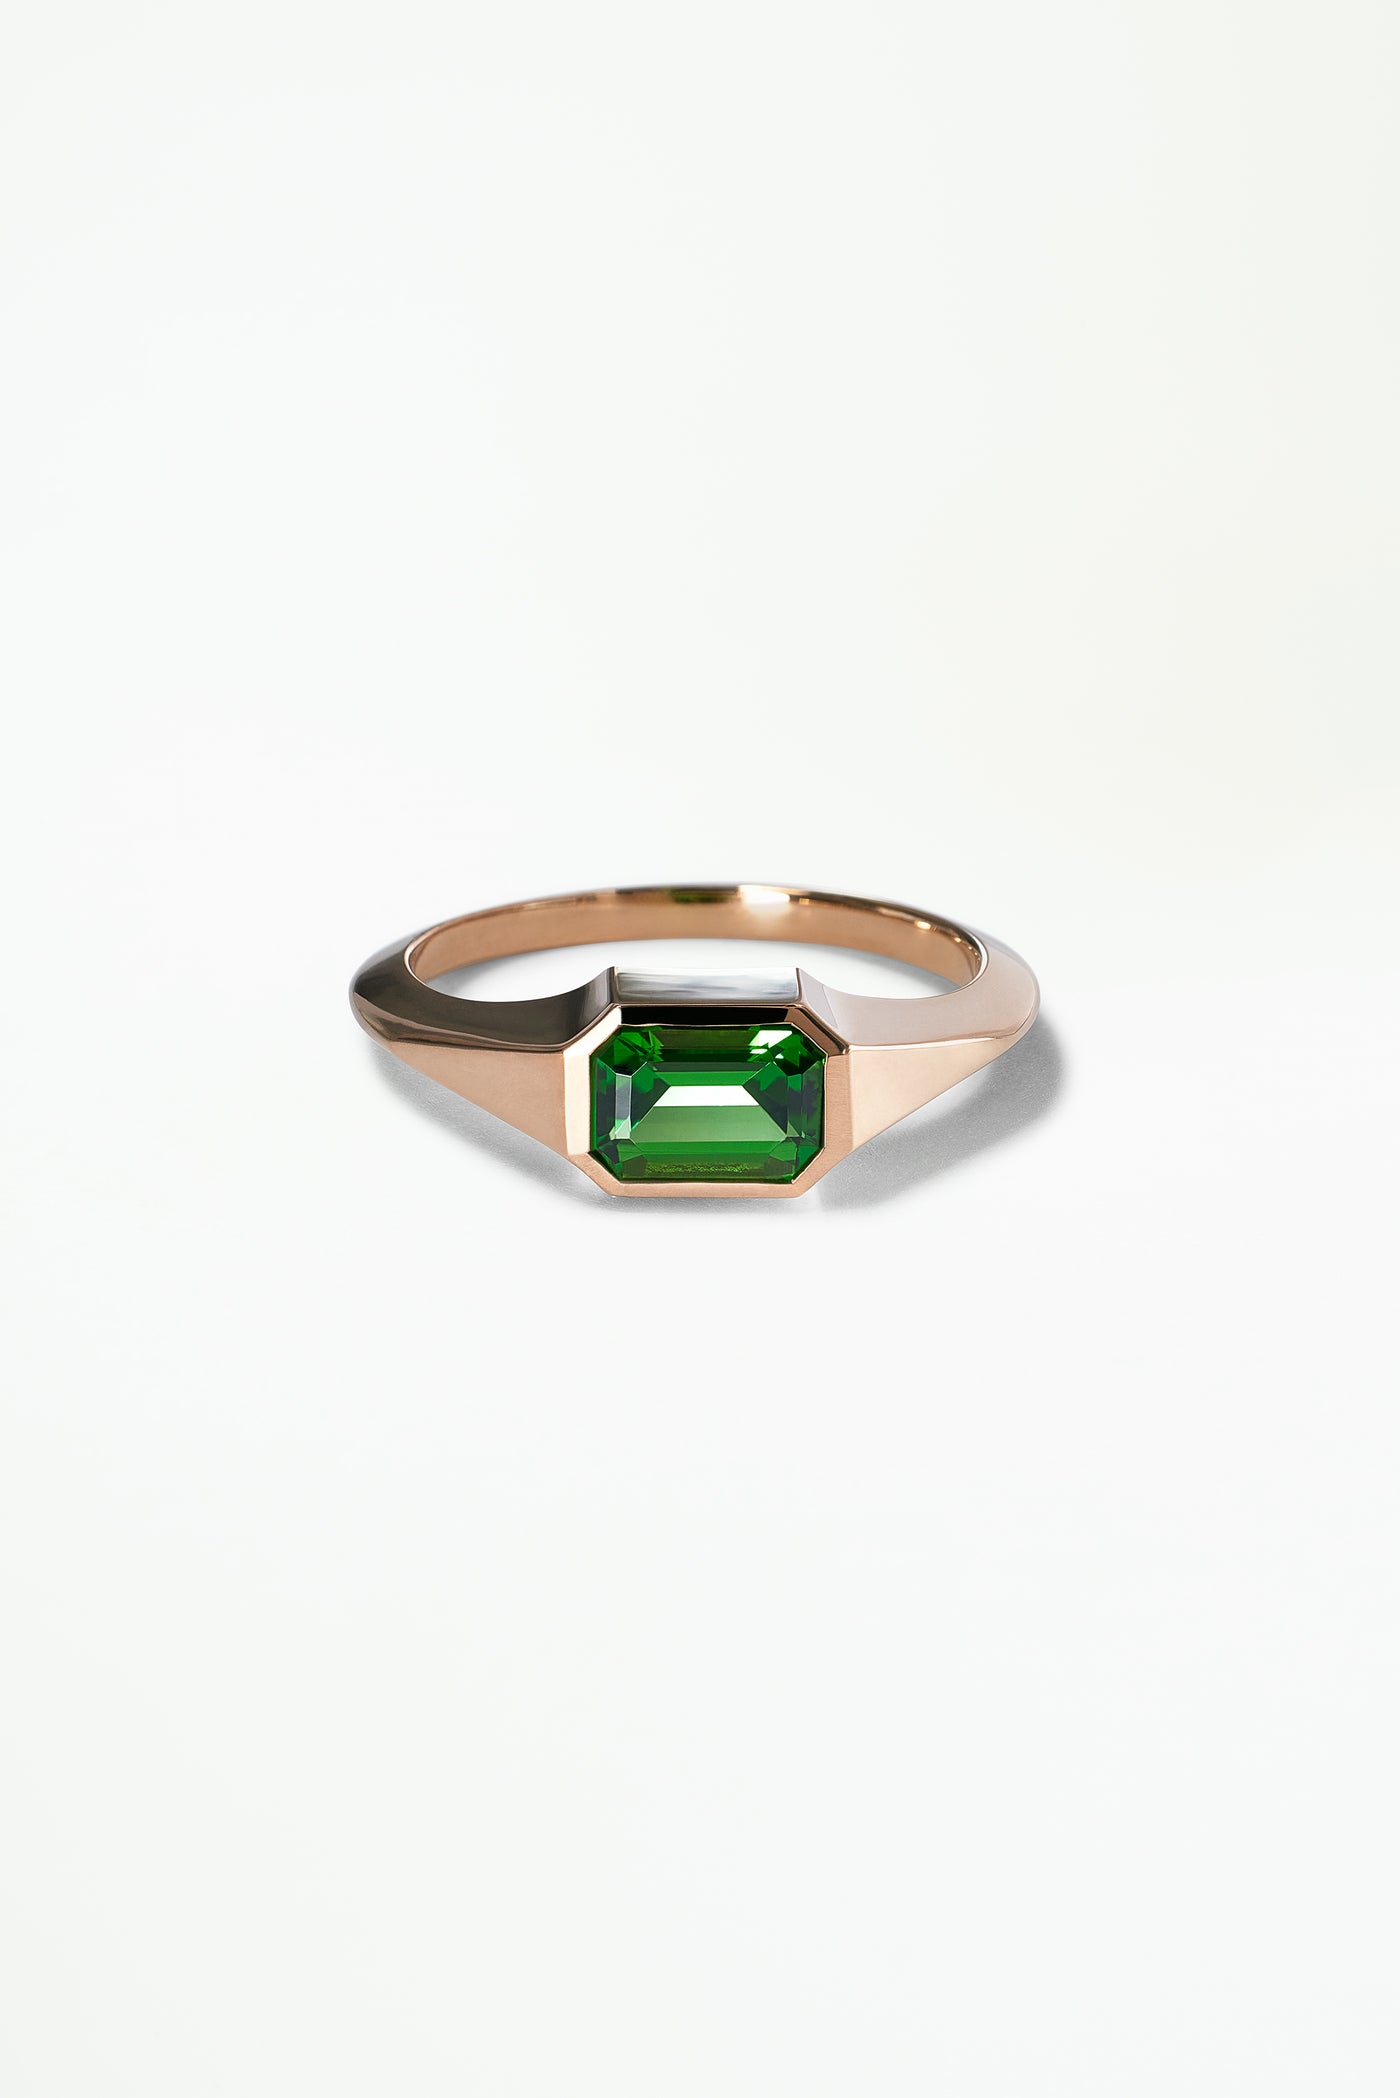 One of a Kind Emerald Cut Green Tourmaline Signet Ring No. 47